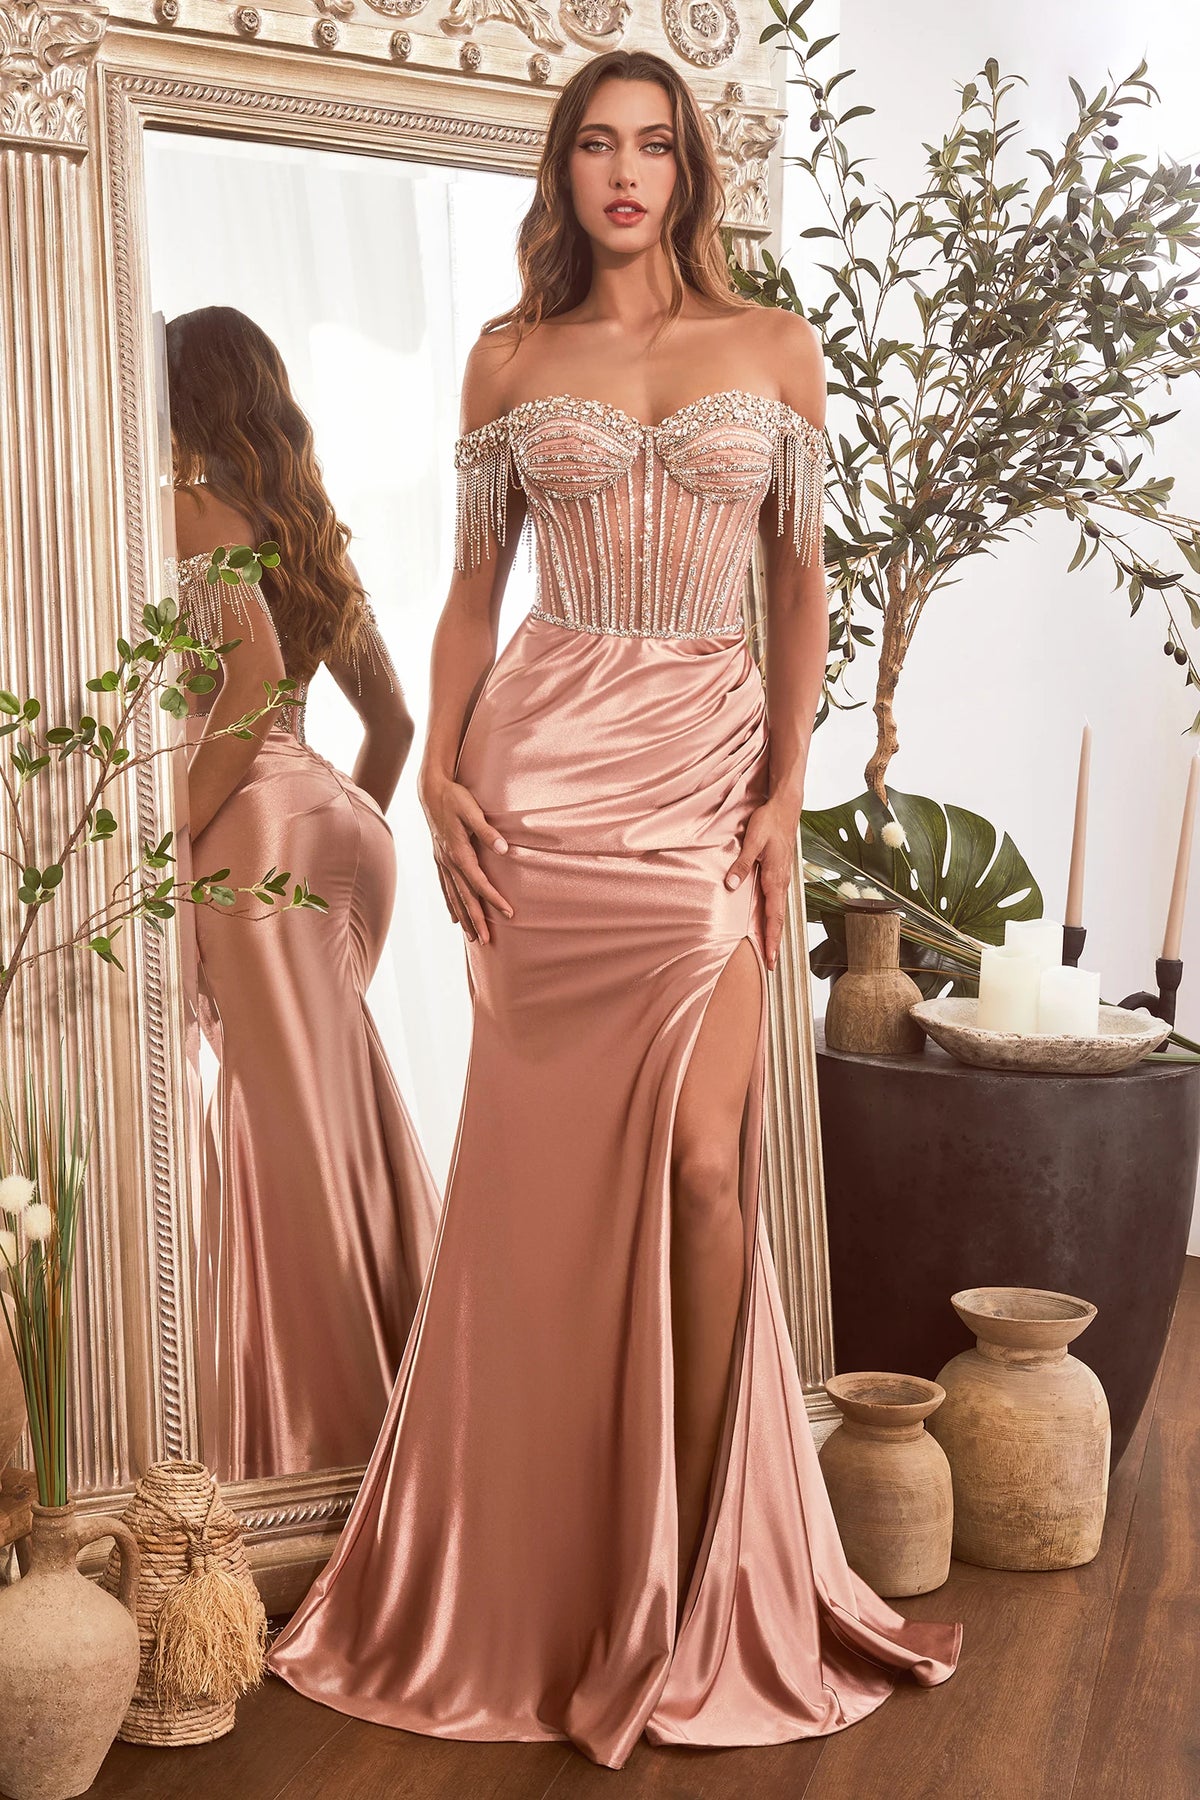 La Divine CD821 Fitted Off the Shoulder Evening Gown - A sophisticated evening gown with a sleek fitted silhouette, alluring leg slit, elegant gathered waistline, romantic off-the-shoulder sweetheart neckline, glamorous embellished bodice, and unique off-the-shoulder fringe detail for an elegant and memorable look.